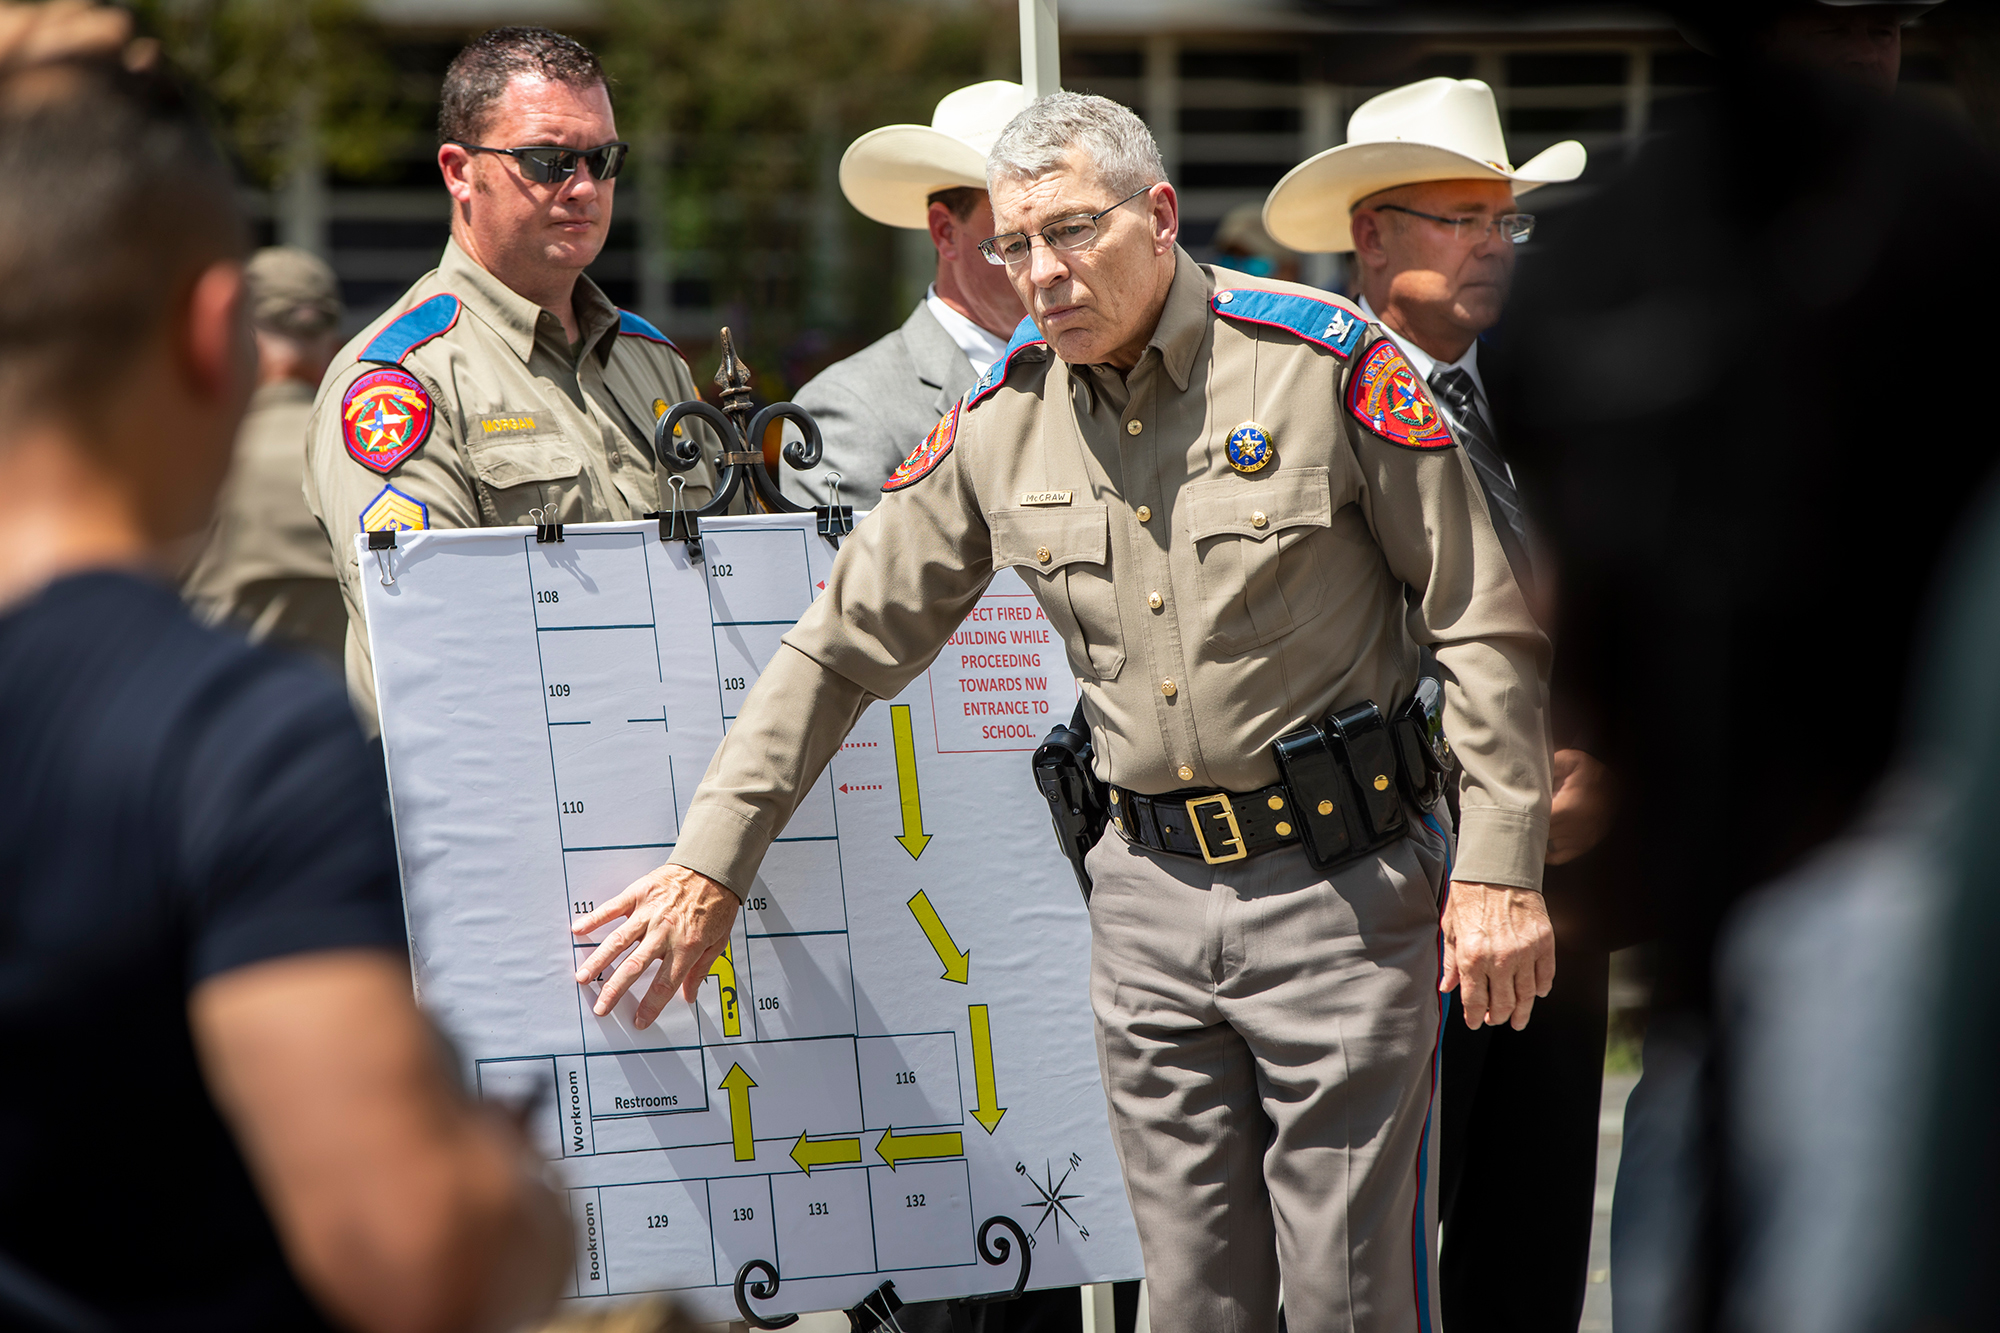 Steven McCraw, the Director and Colonel of the Texas Department of Public Safety, points to a map of the shooter’s movements during a press conference in Uvalde, Texas, on Friday, May 27.